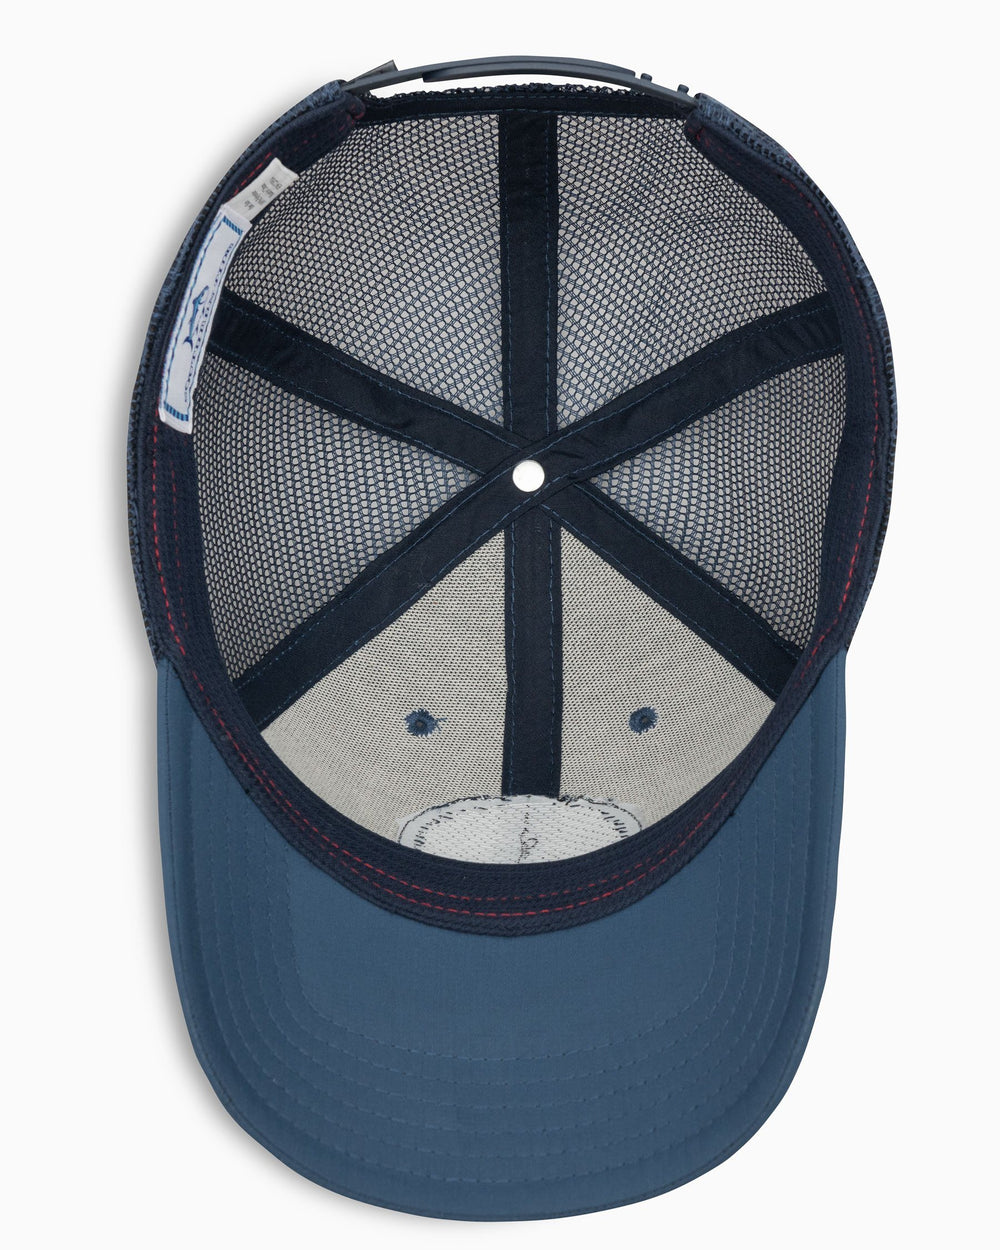 The below view of the Men's North Carolina Patch Performance Trucker Hat by Southern Tide - Seven Seas Blue